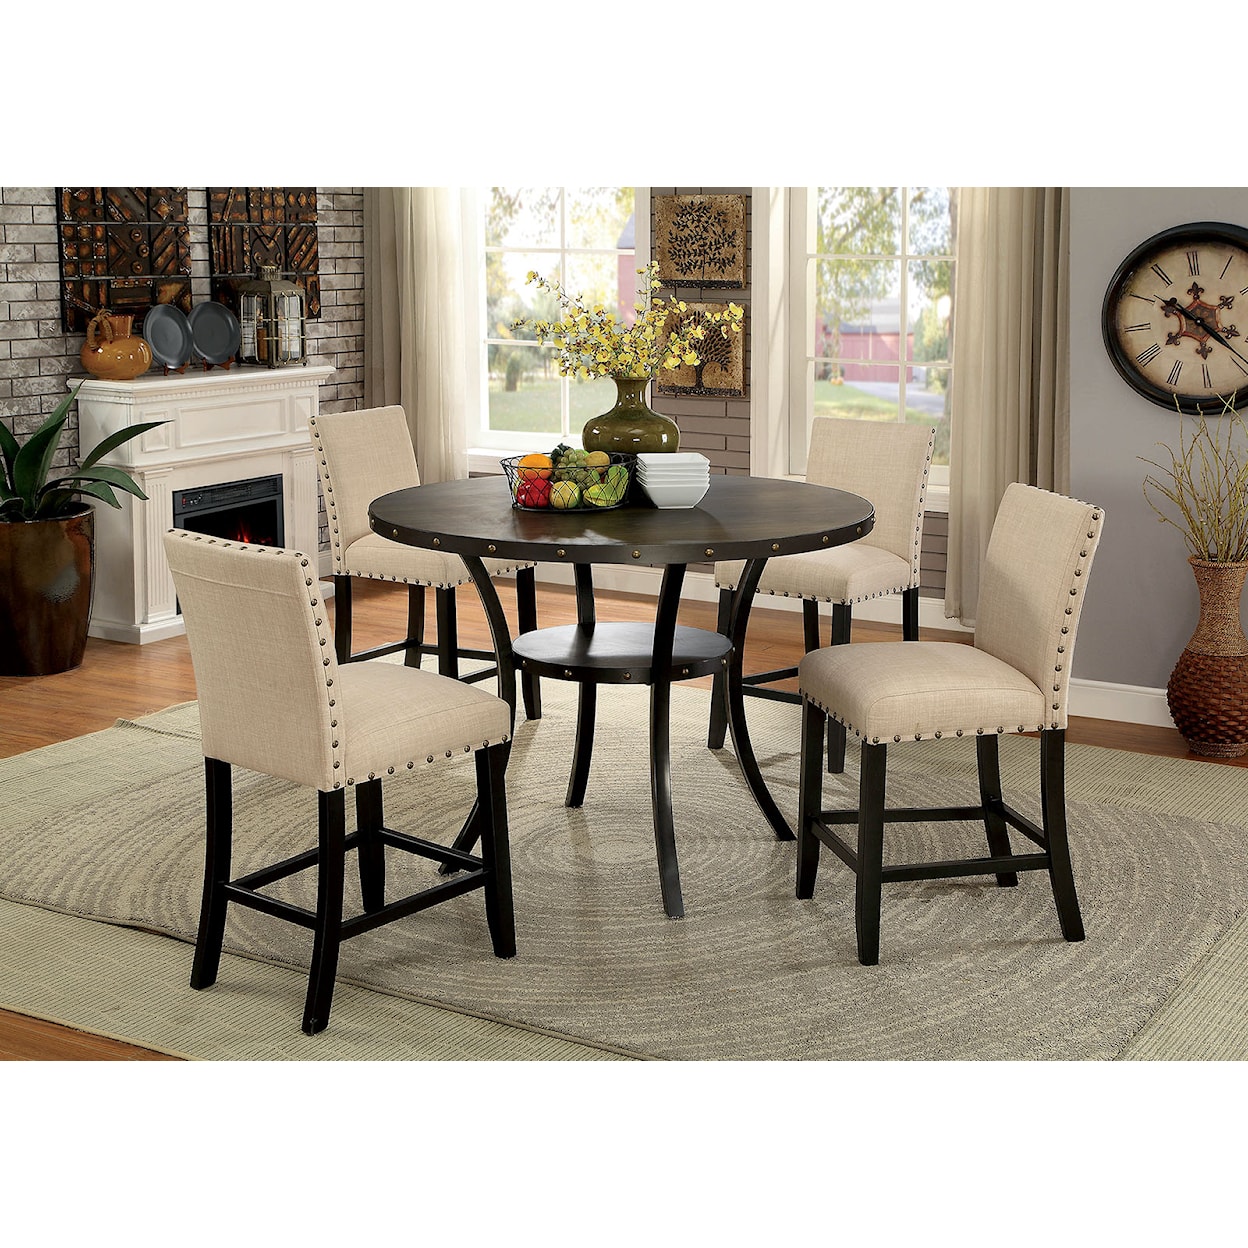 Furniture of America Kaitlin 5-Piece Round Counter Height Table Set